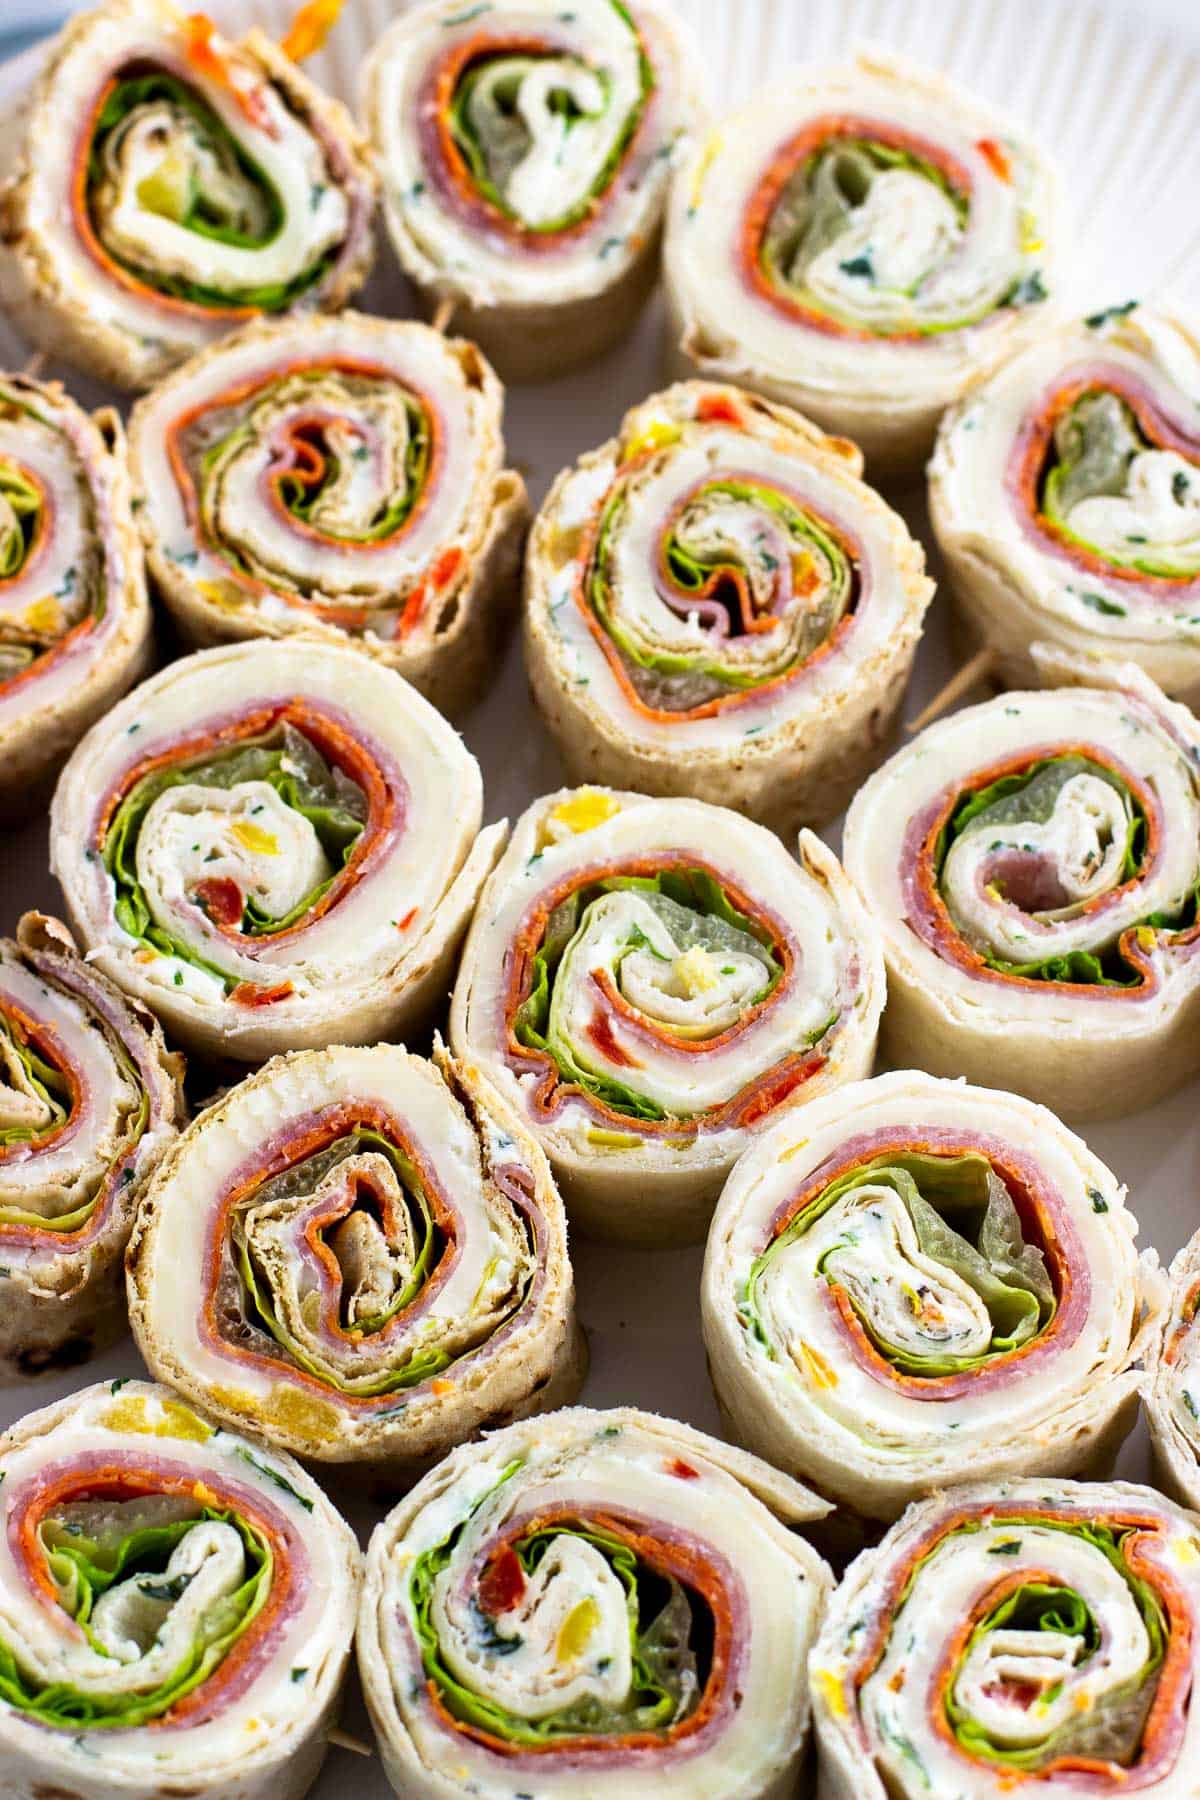 Italian-style pinwheel rounds on a plate.